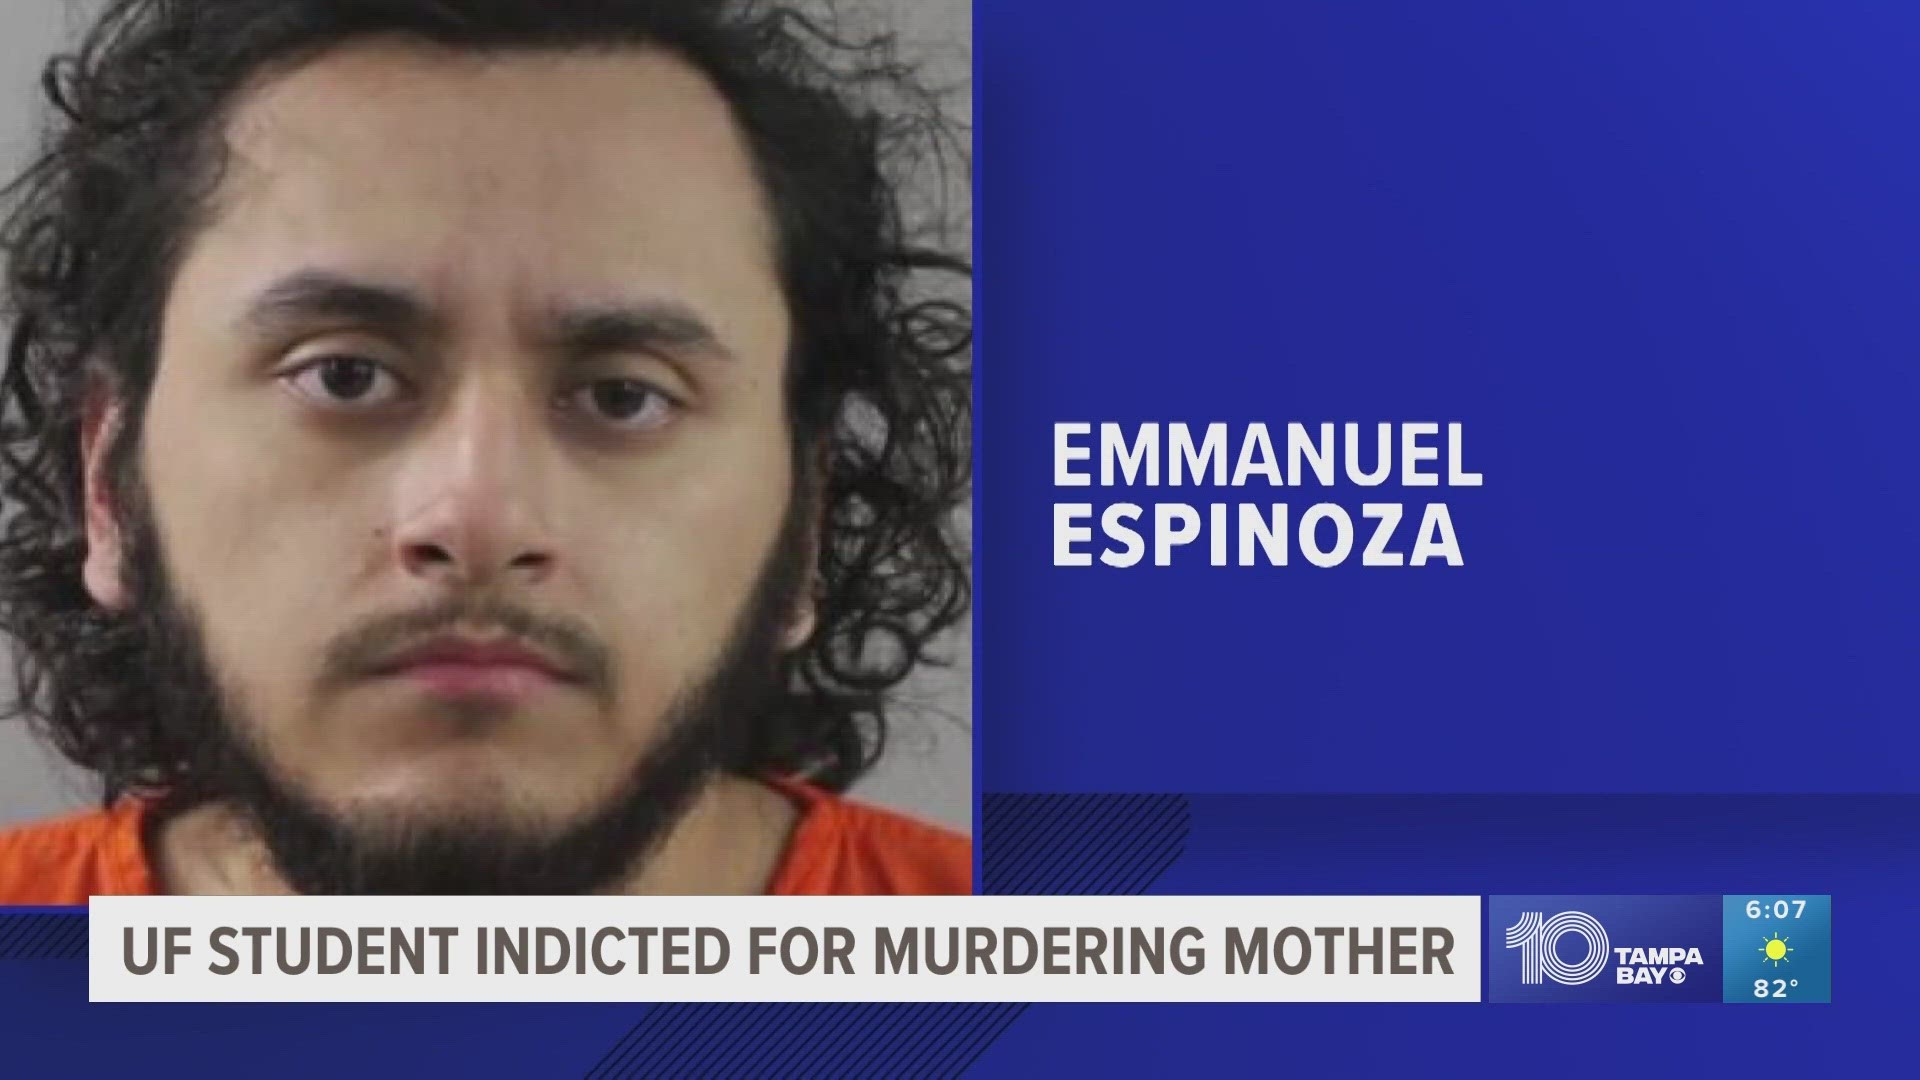 The suspect said he wanted to kill his mom for several years because she irritated him.